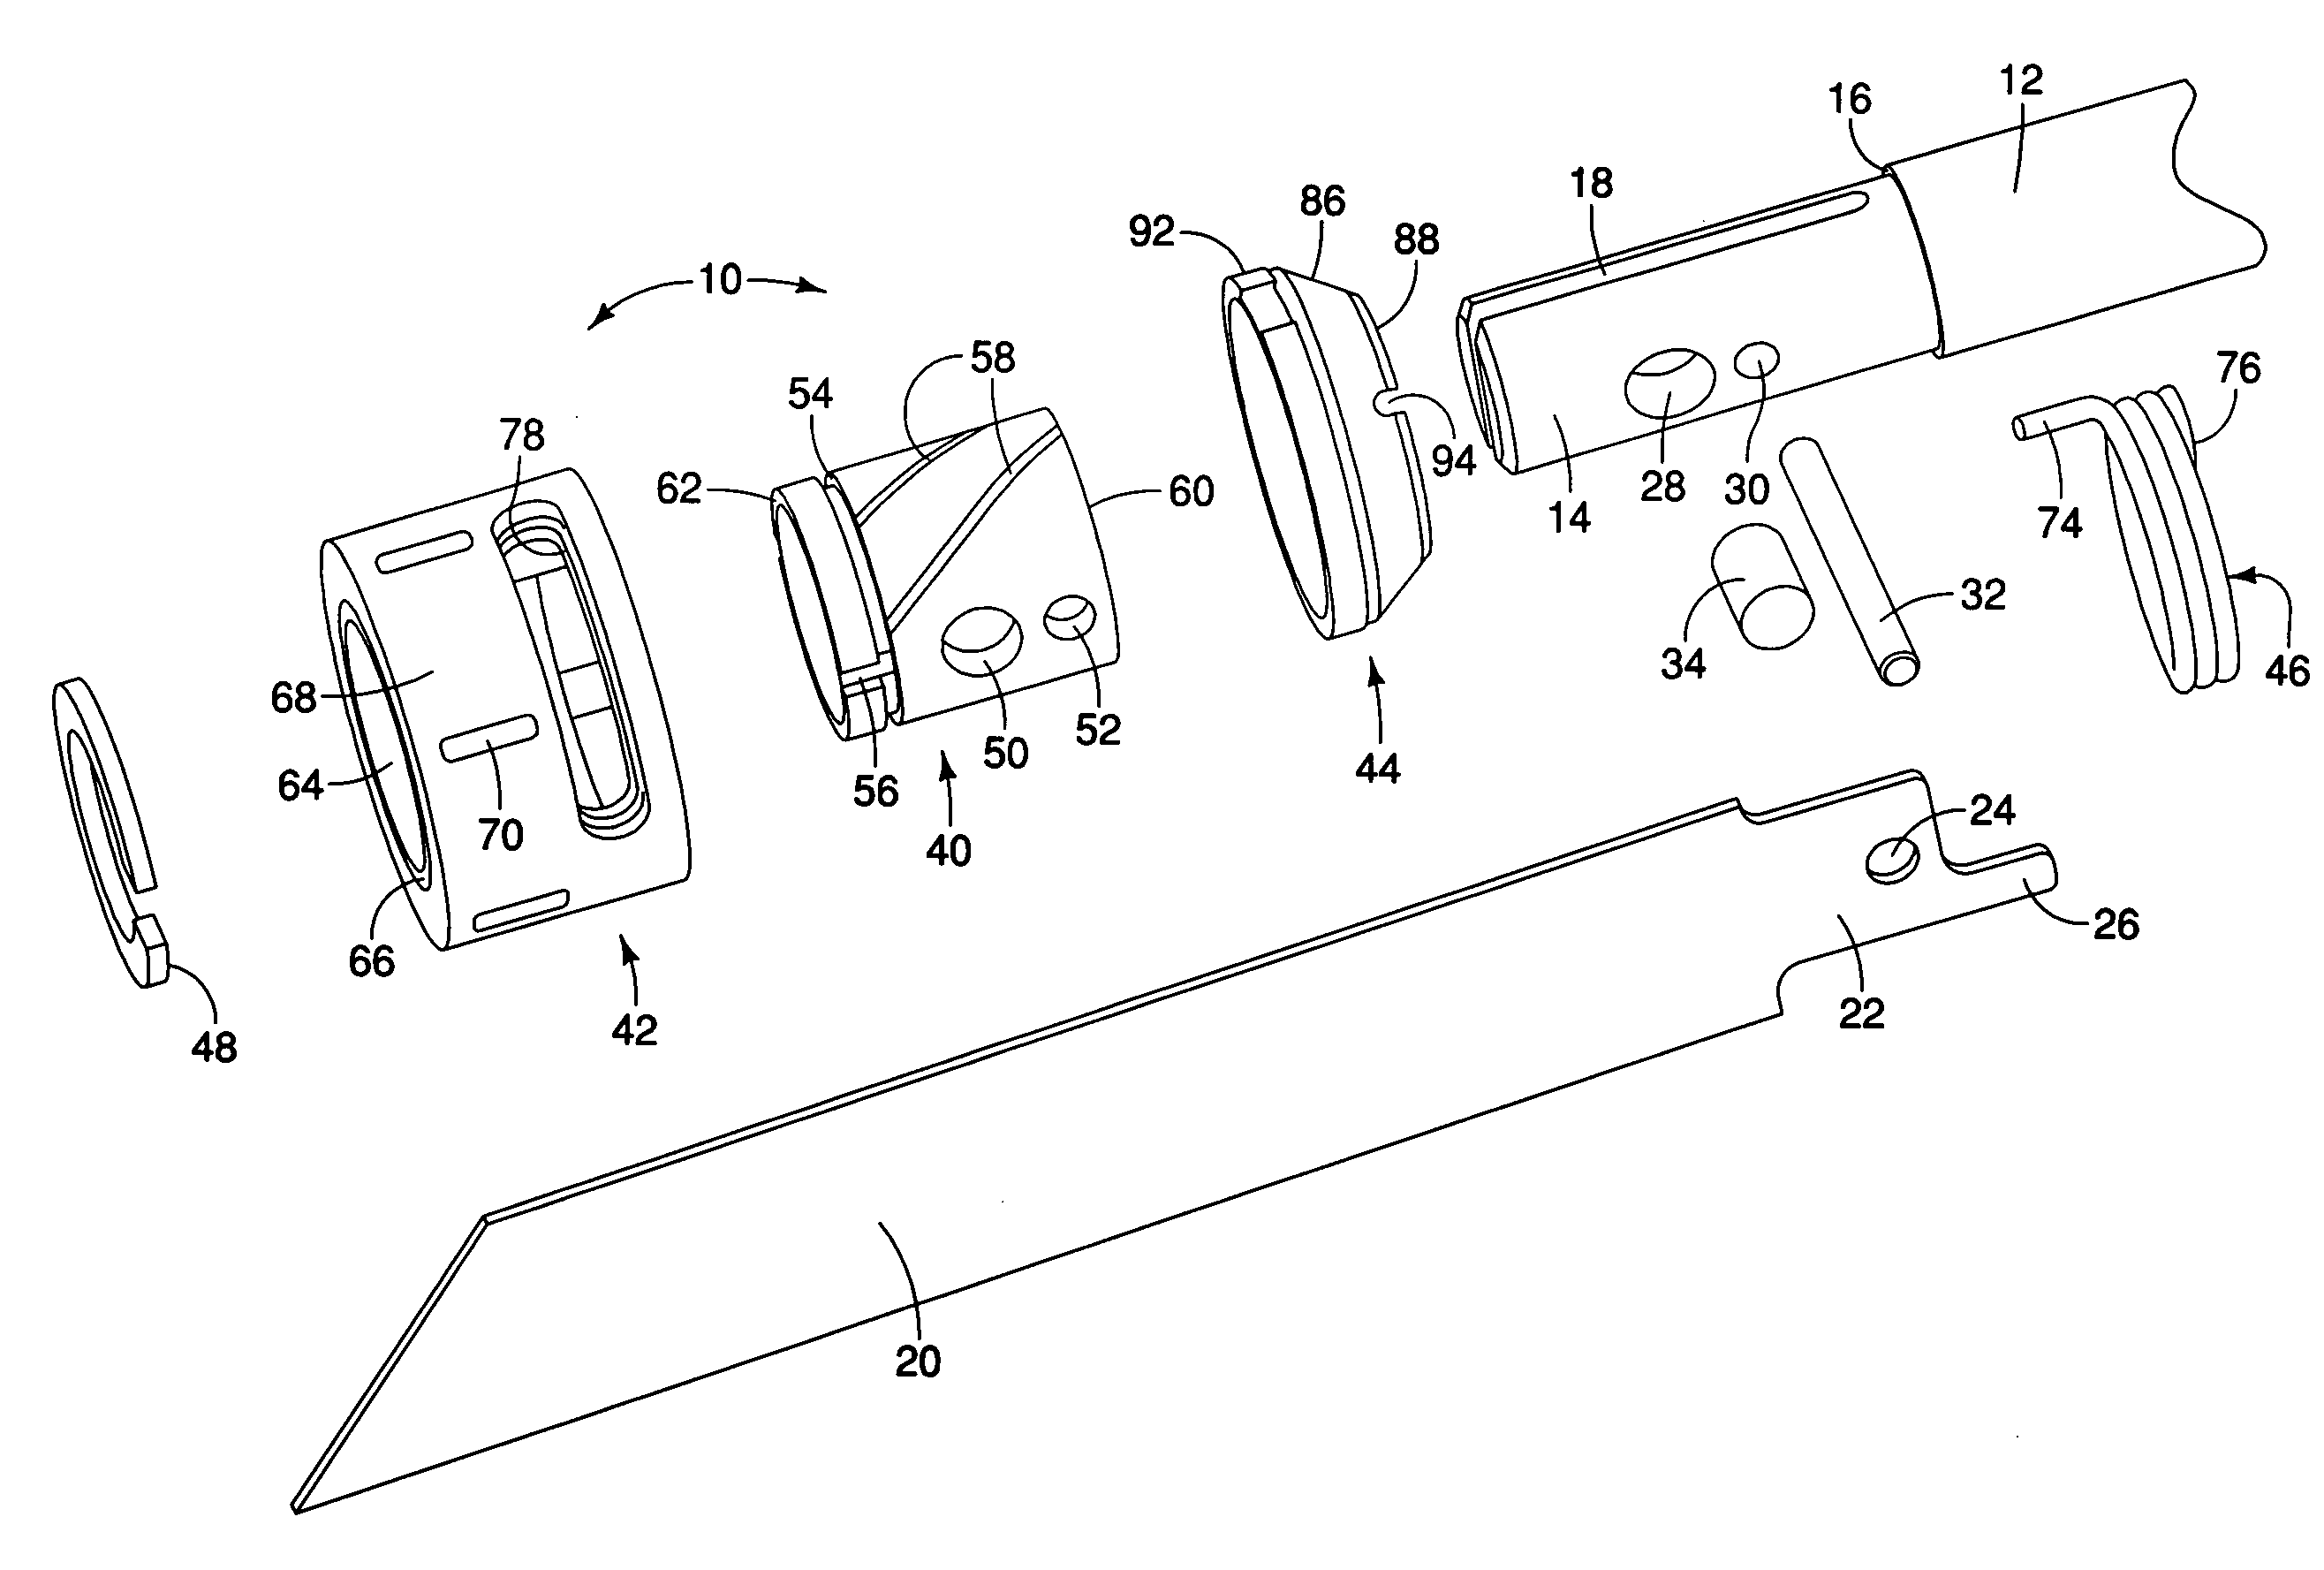 Clamping apparatus for a reciprocating tool